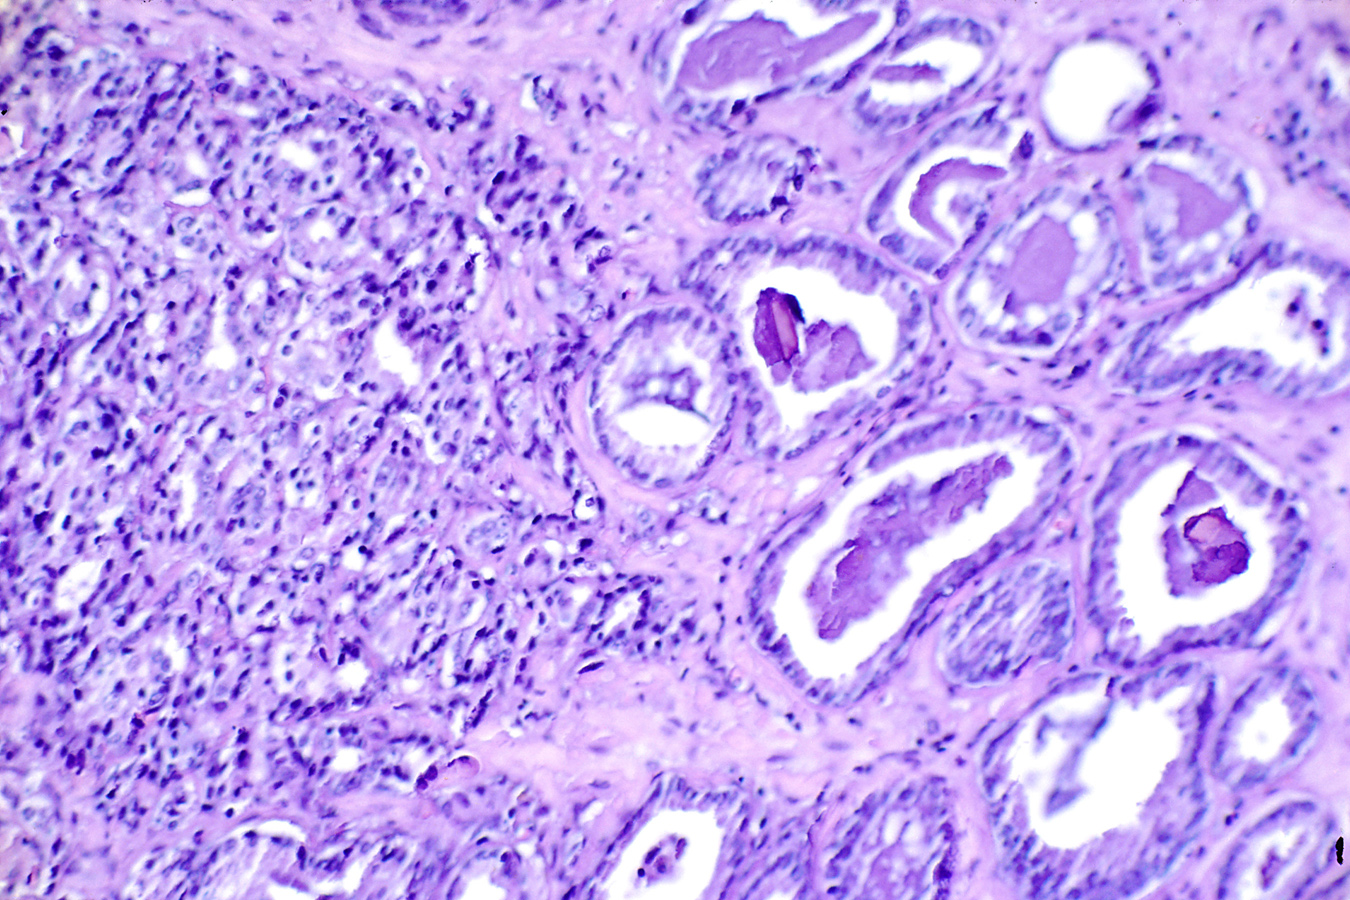 Histological slide (H & E stain at x300) showing prostate cancer. On the right is a somewhat normal Gleason Value of 3 (out of 5) with moderately differentiated cancer. On the left is less normal tissue with a Gleason Value of 4 (out of 5) that is highly undifferentiated. The Gleason score is the sum of the two worst areas of the histological slide. (National Cancer Institute)